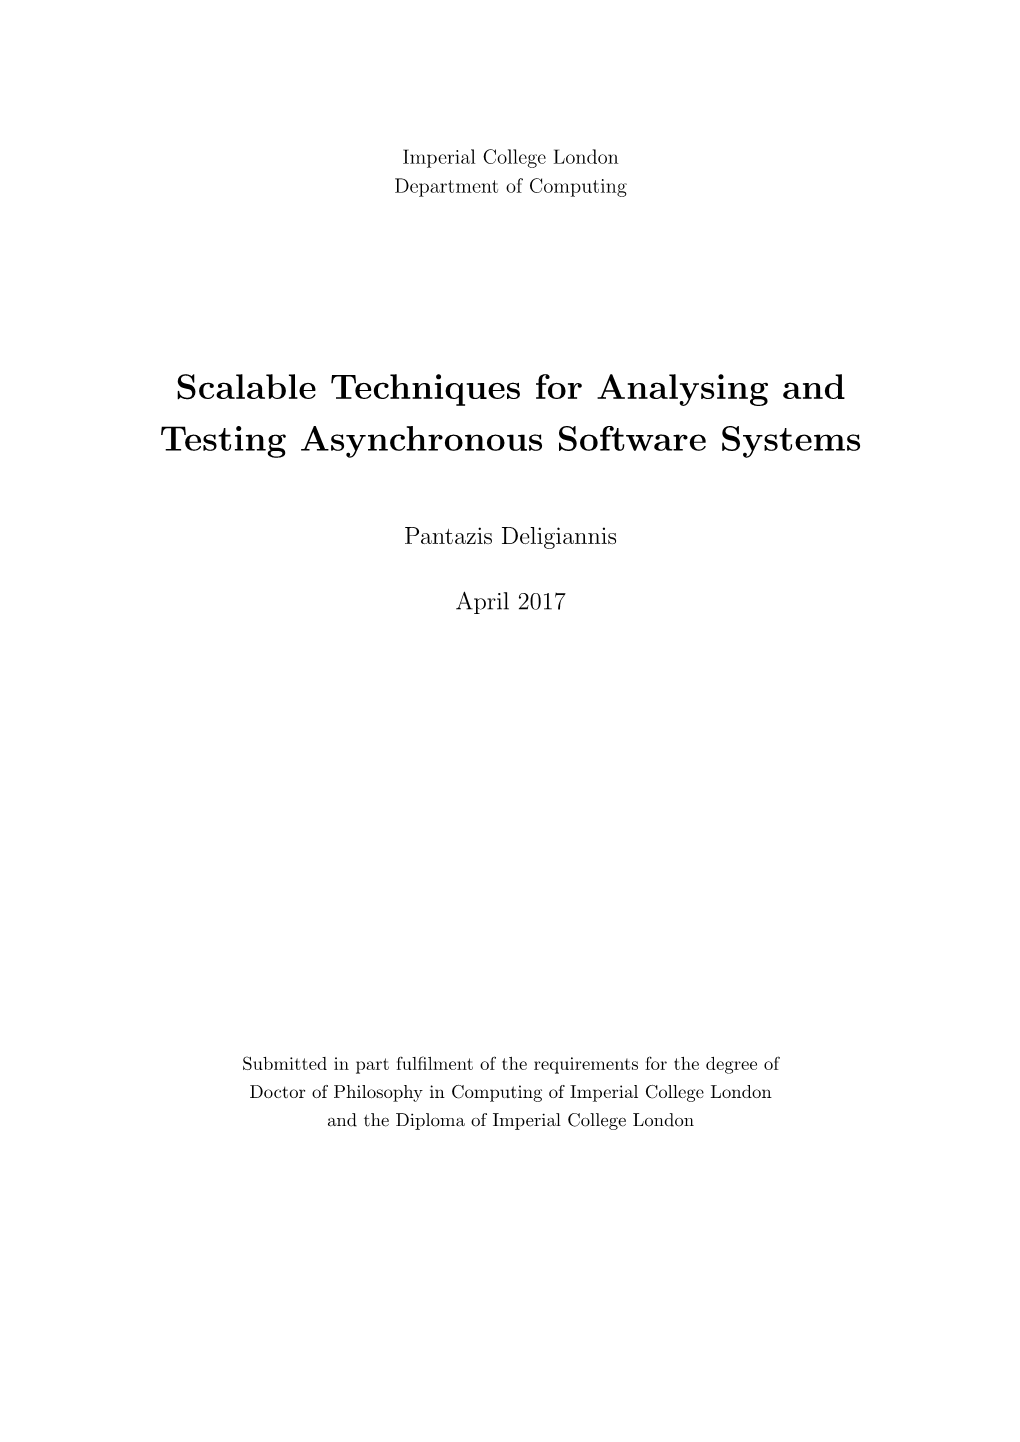 Scalable Techniques for Analysing and Testing Asynchronous Software Systems